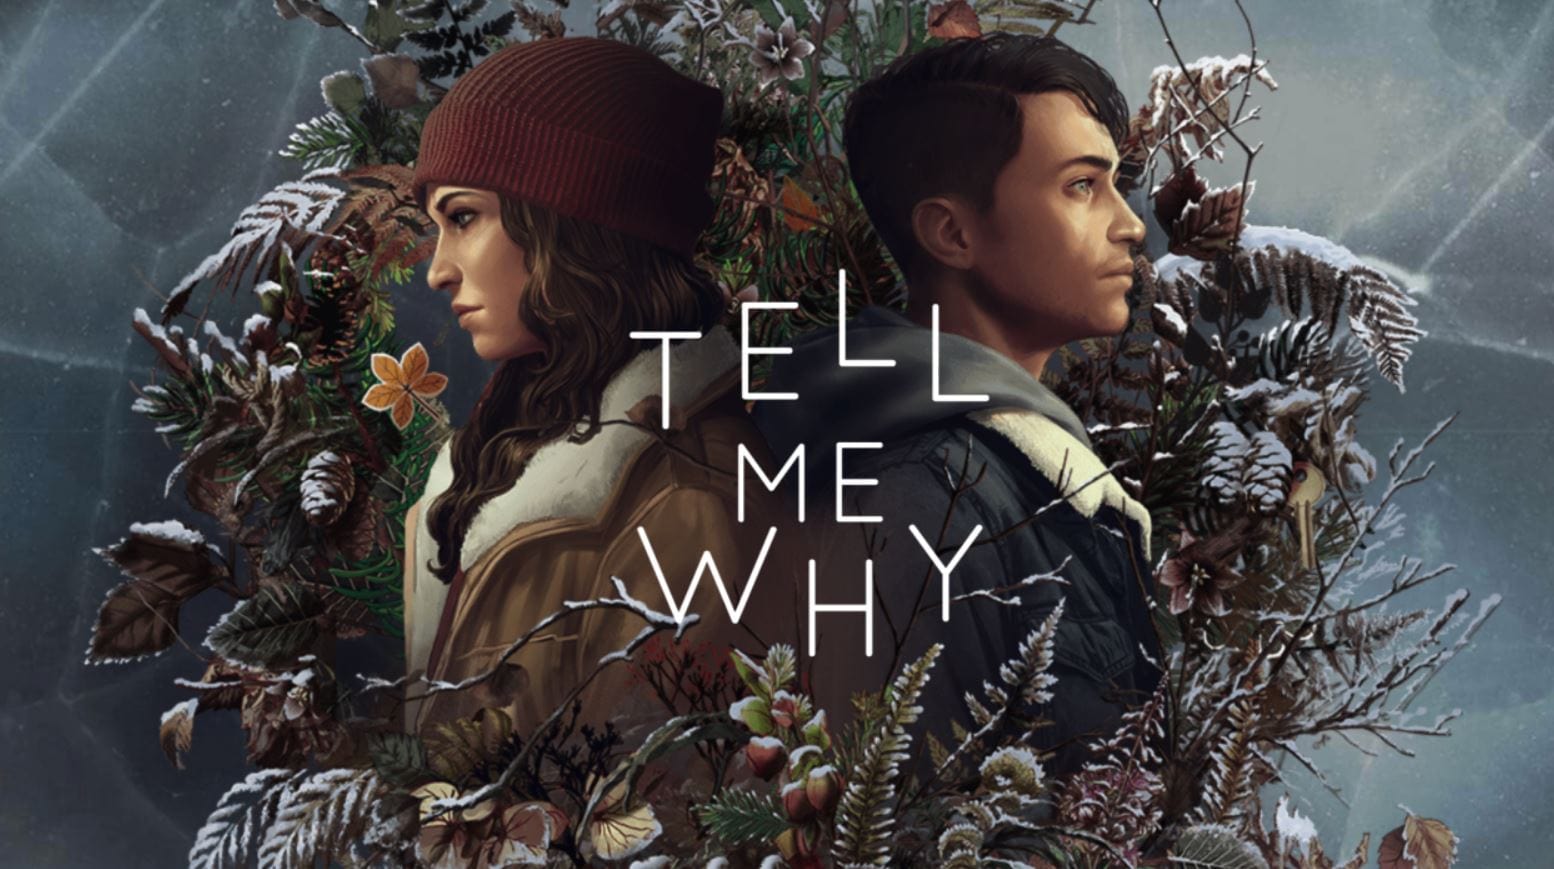 download tell me why game